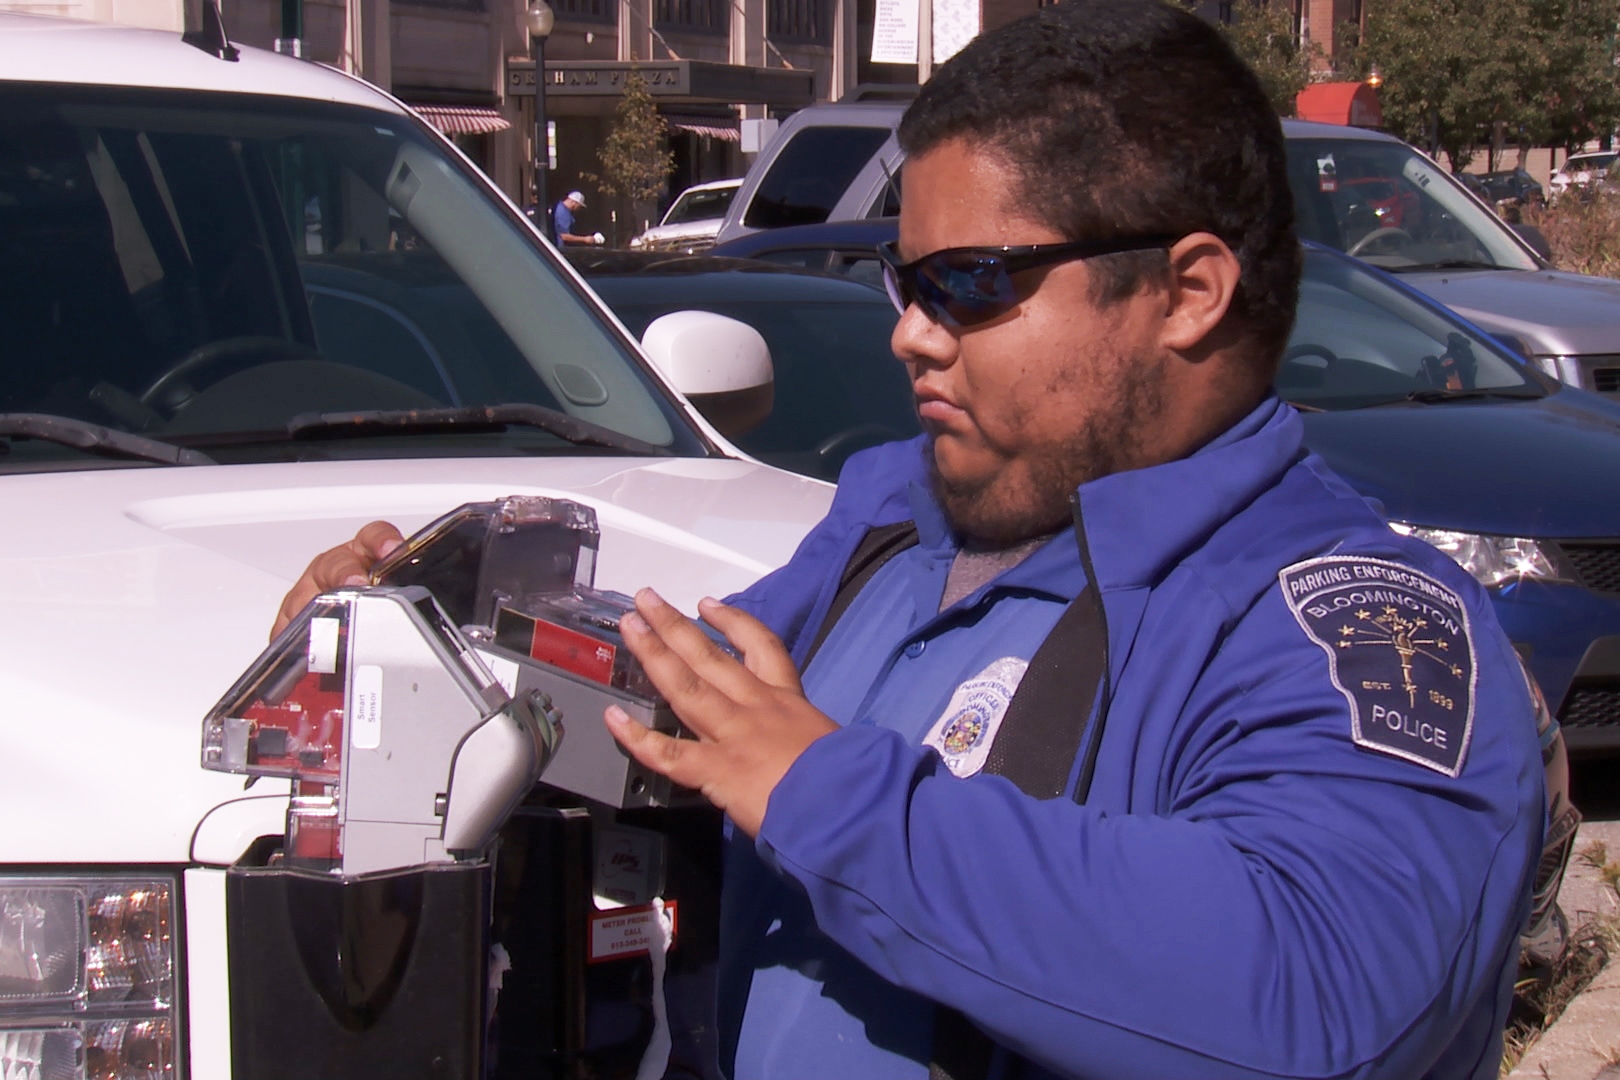 A city employee fixes a parking meter after many were vandalized, Oct. 23, 2019.